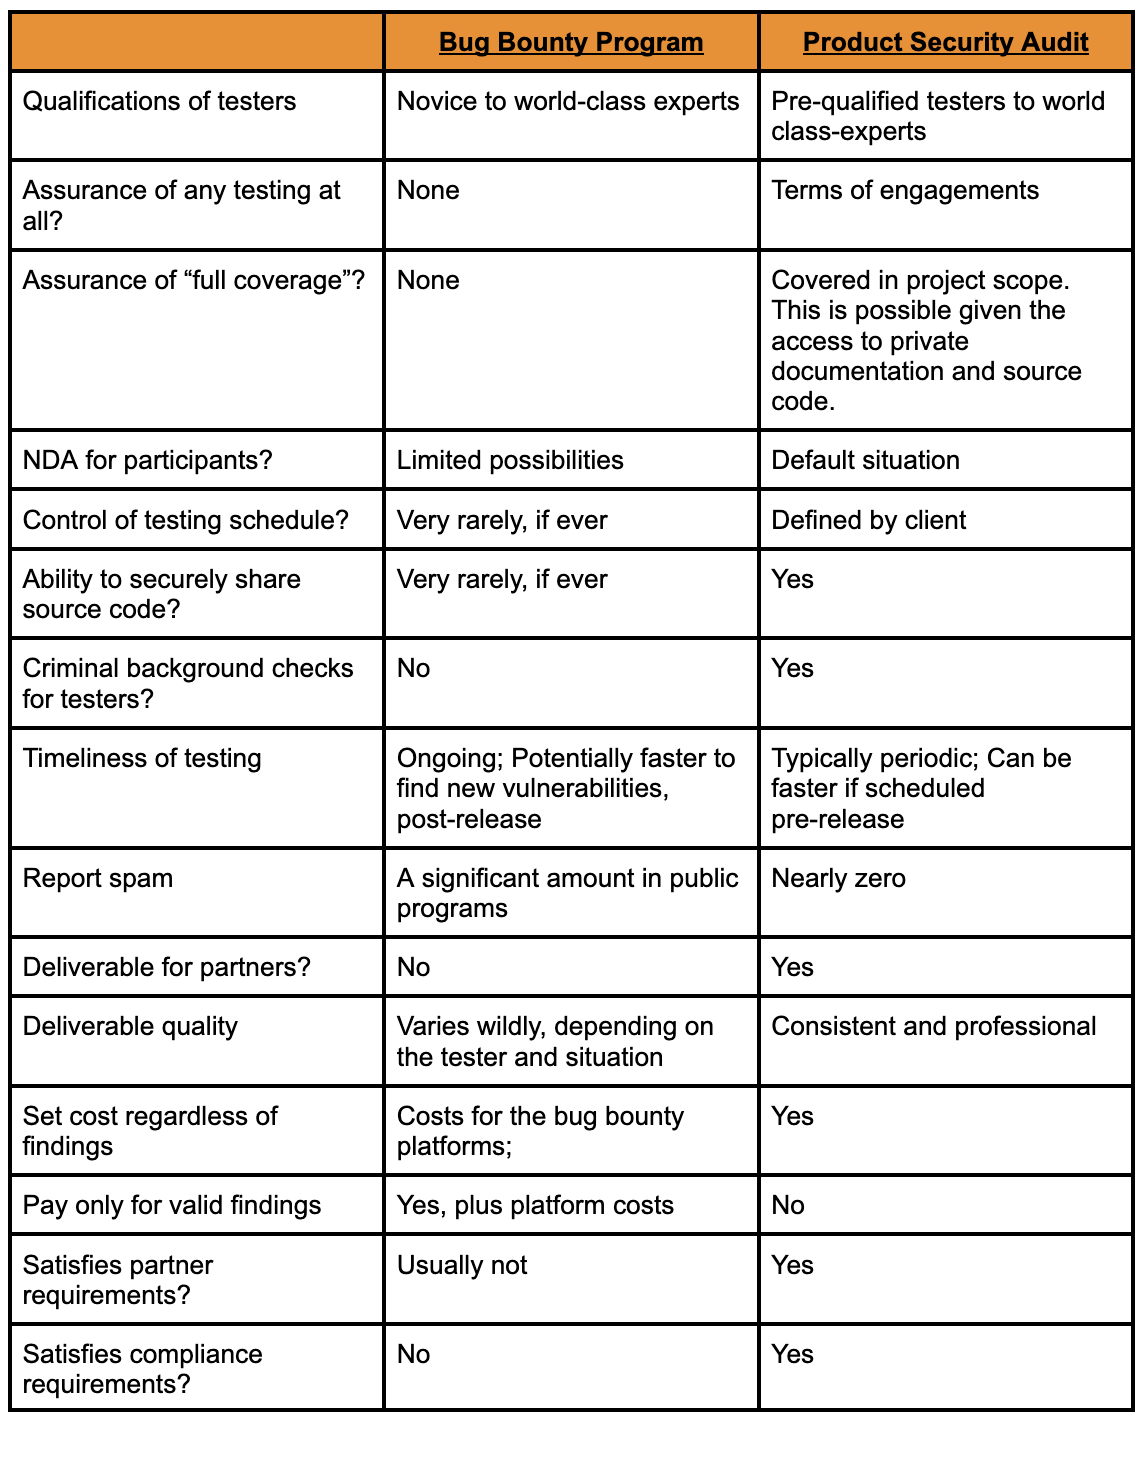 Product Security Audit versus Bug Bounty table